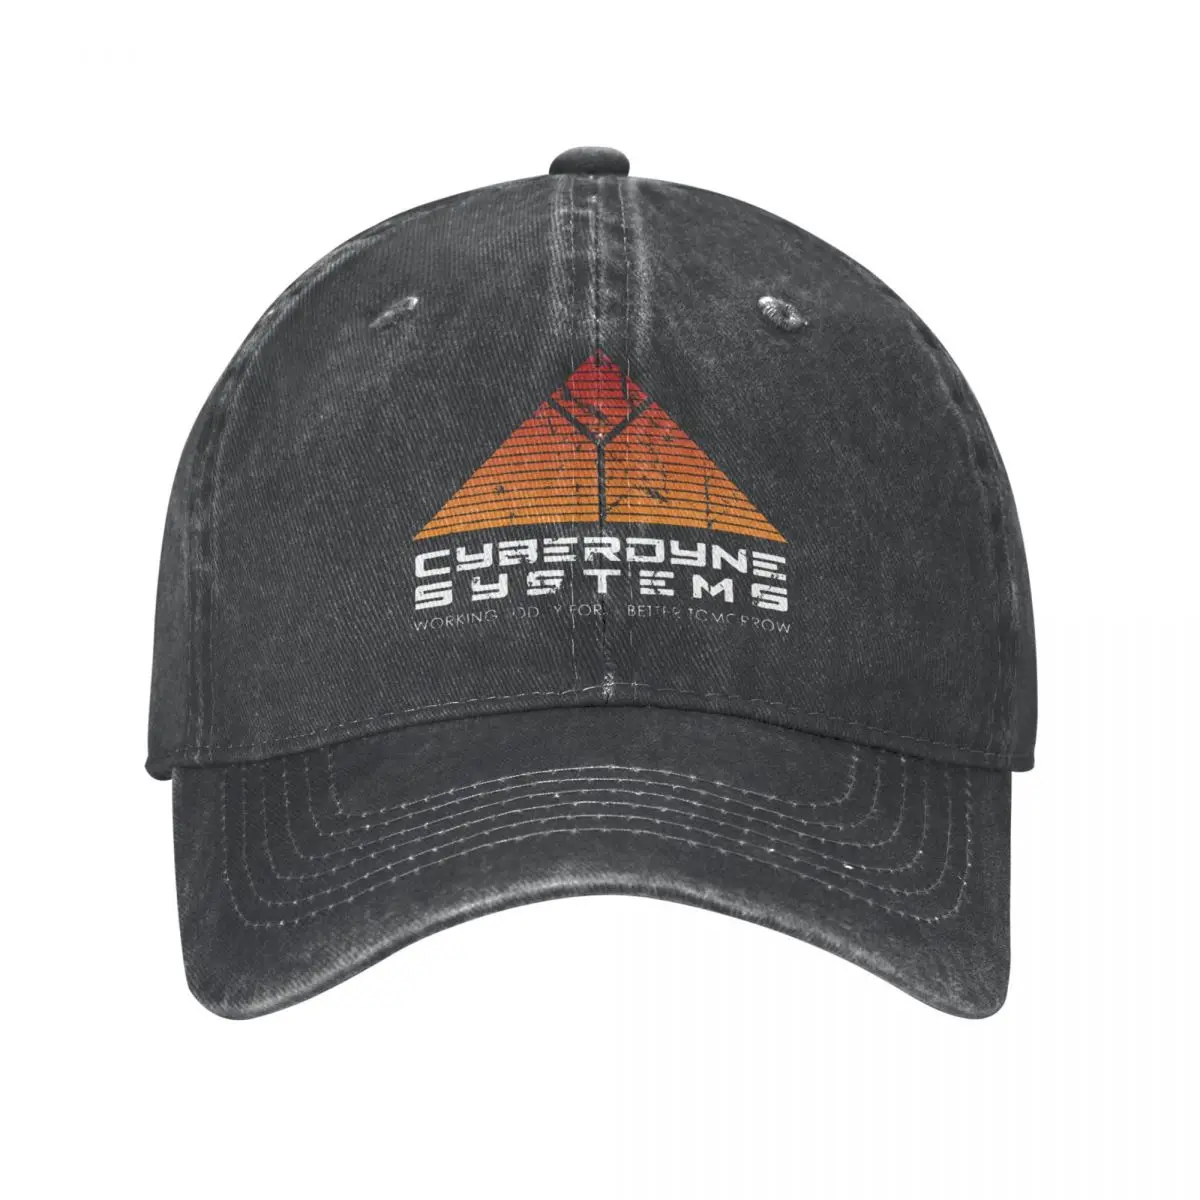 

Cyberdyne Systems Skynet Logo Baseball Cap Distressed Denim Washed Terminator John Research Connor Cap Outdoor Workouts Caps Hat